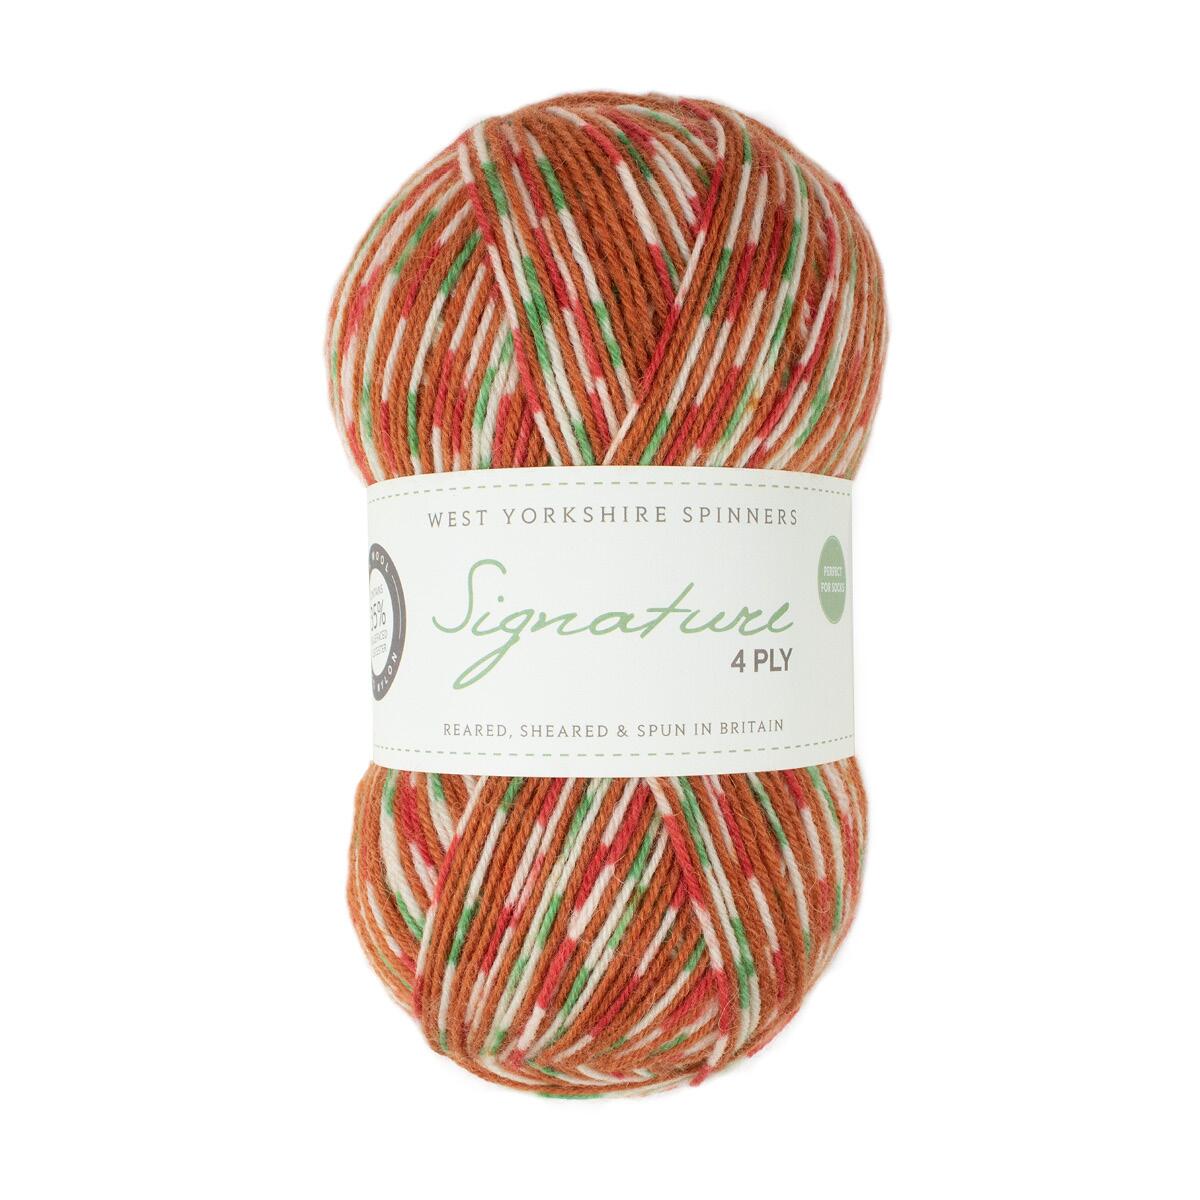 West Yorkshire Spinners Signature 4ply "Gingerbread" 100g